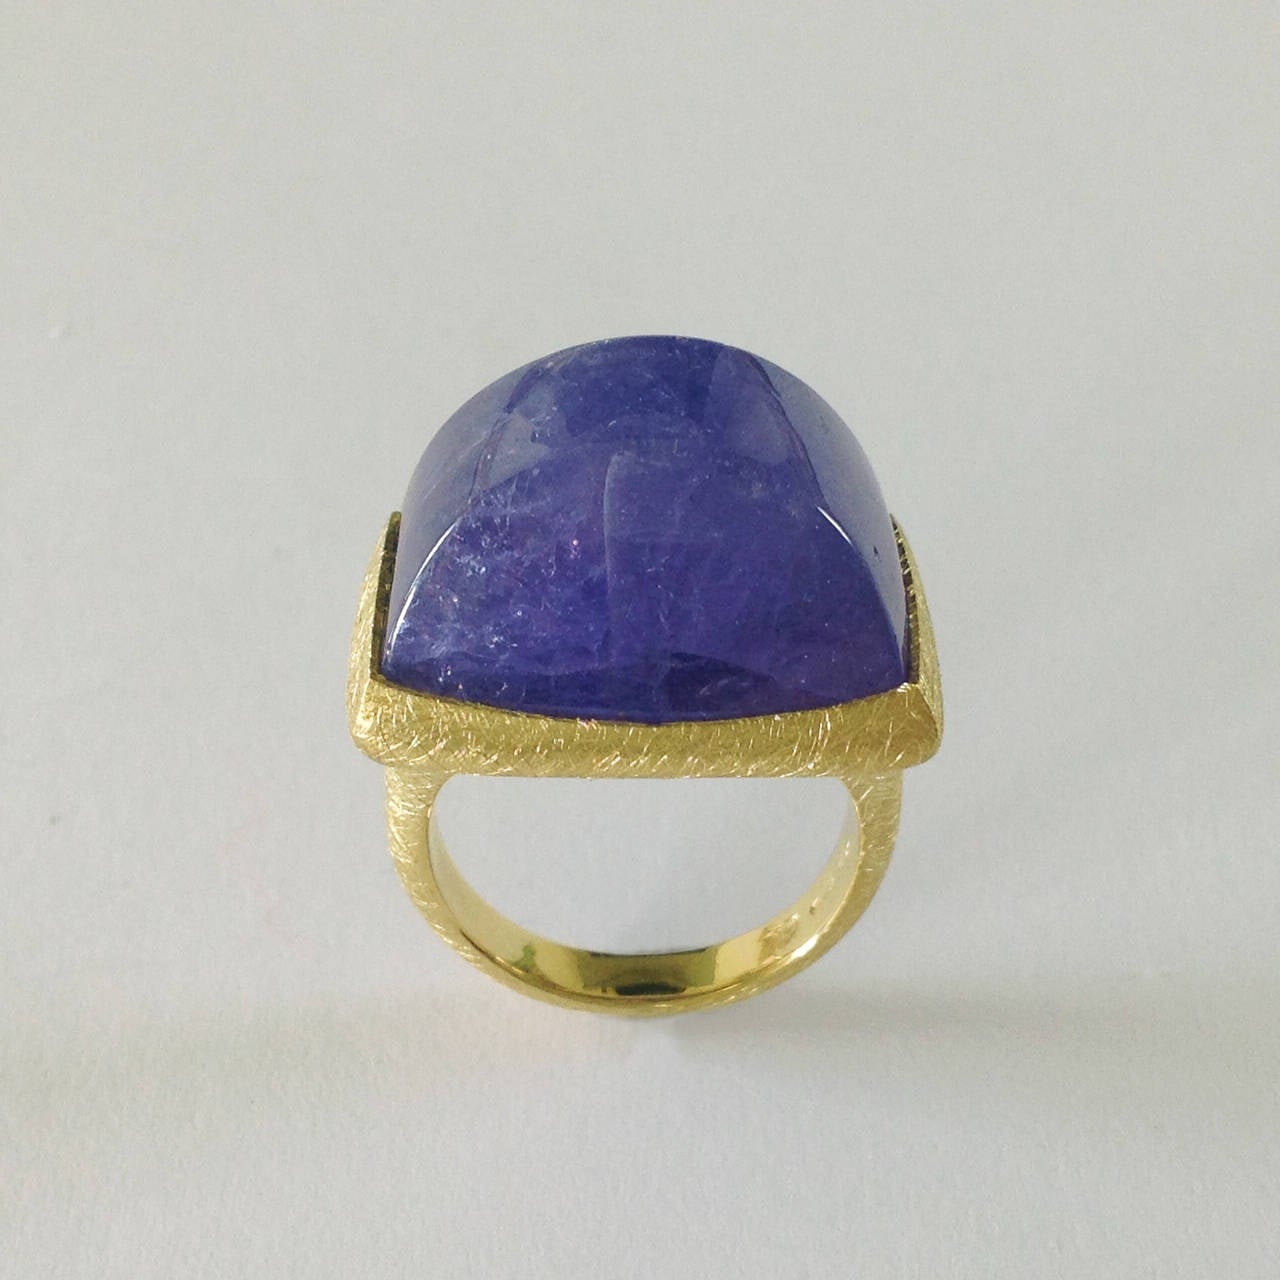 Dalben One of a Kind Tanzanite Scratch Engraved Gold Ring 2